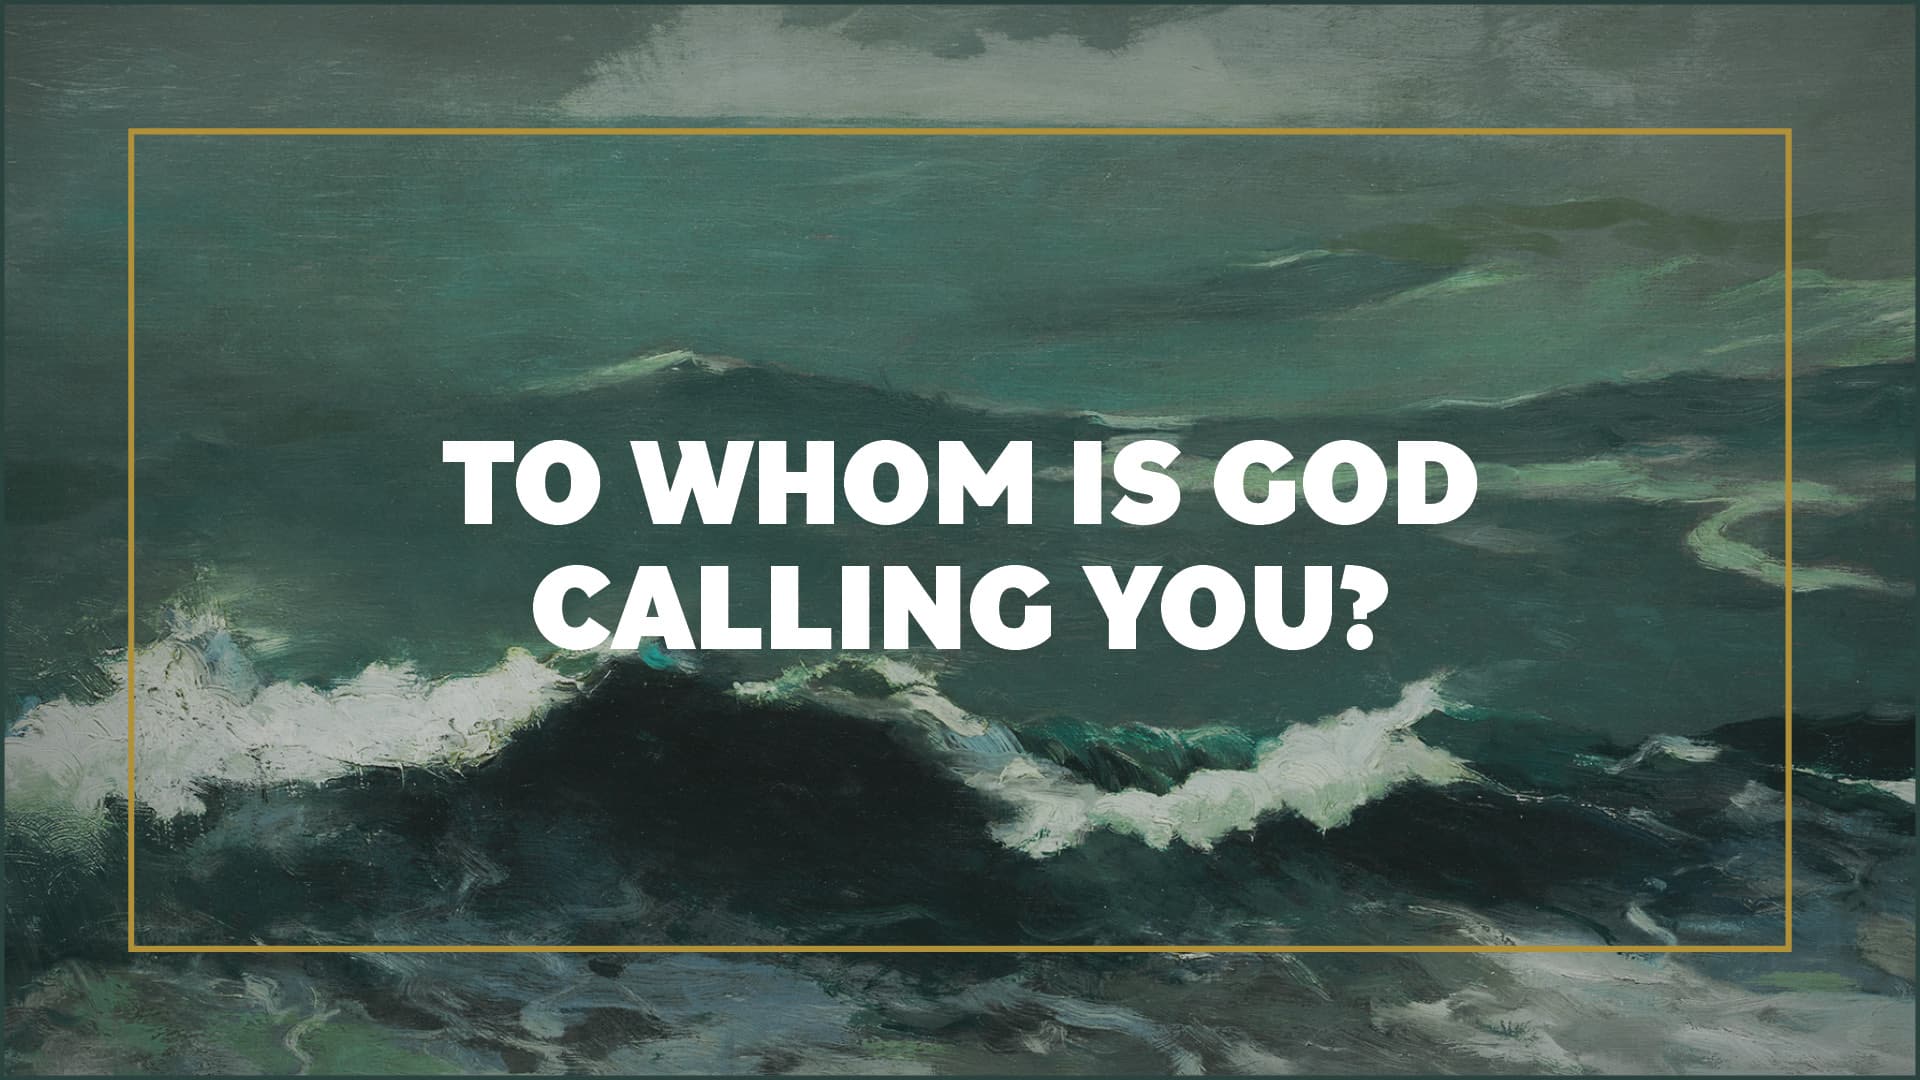 To whom is God calling you?